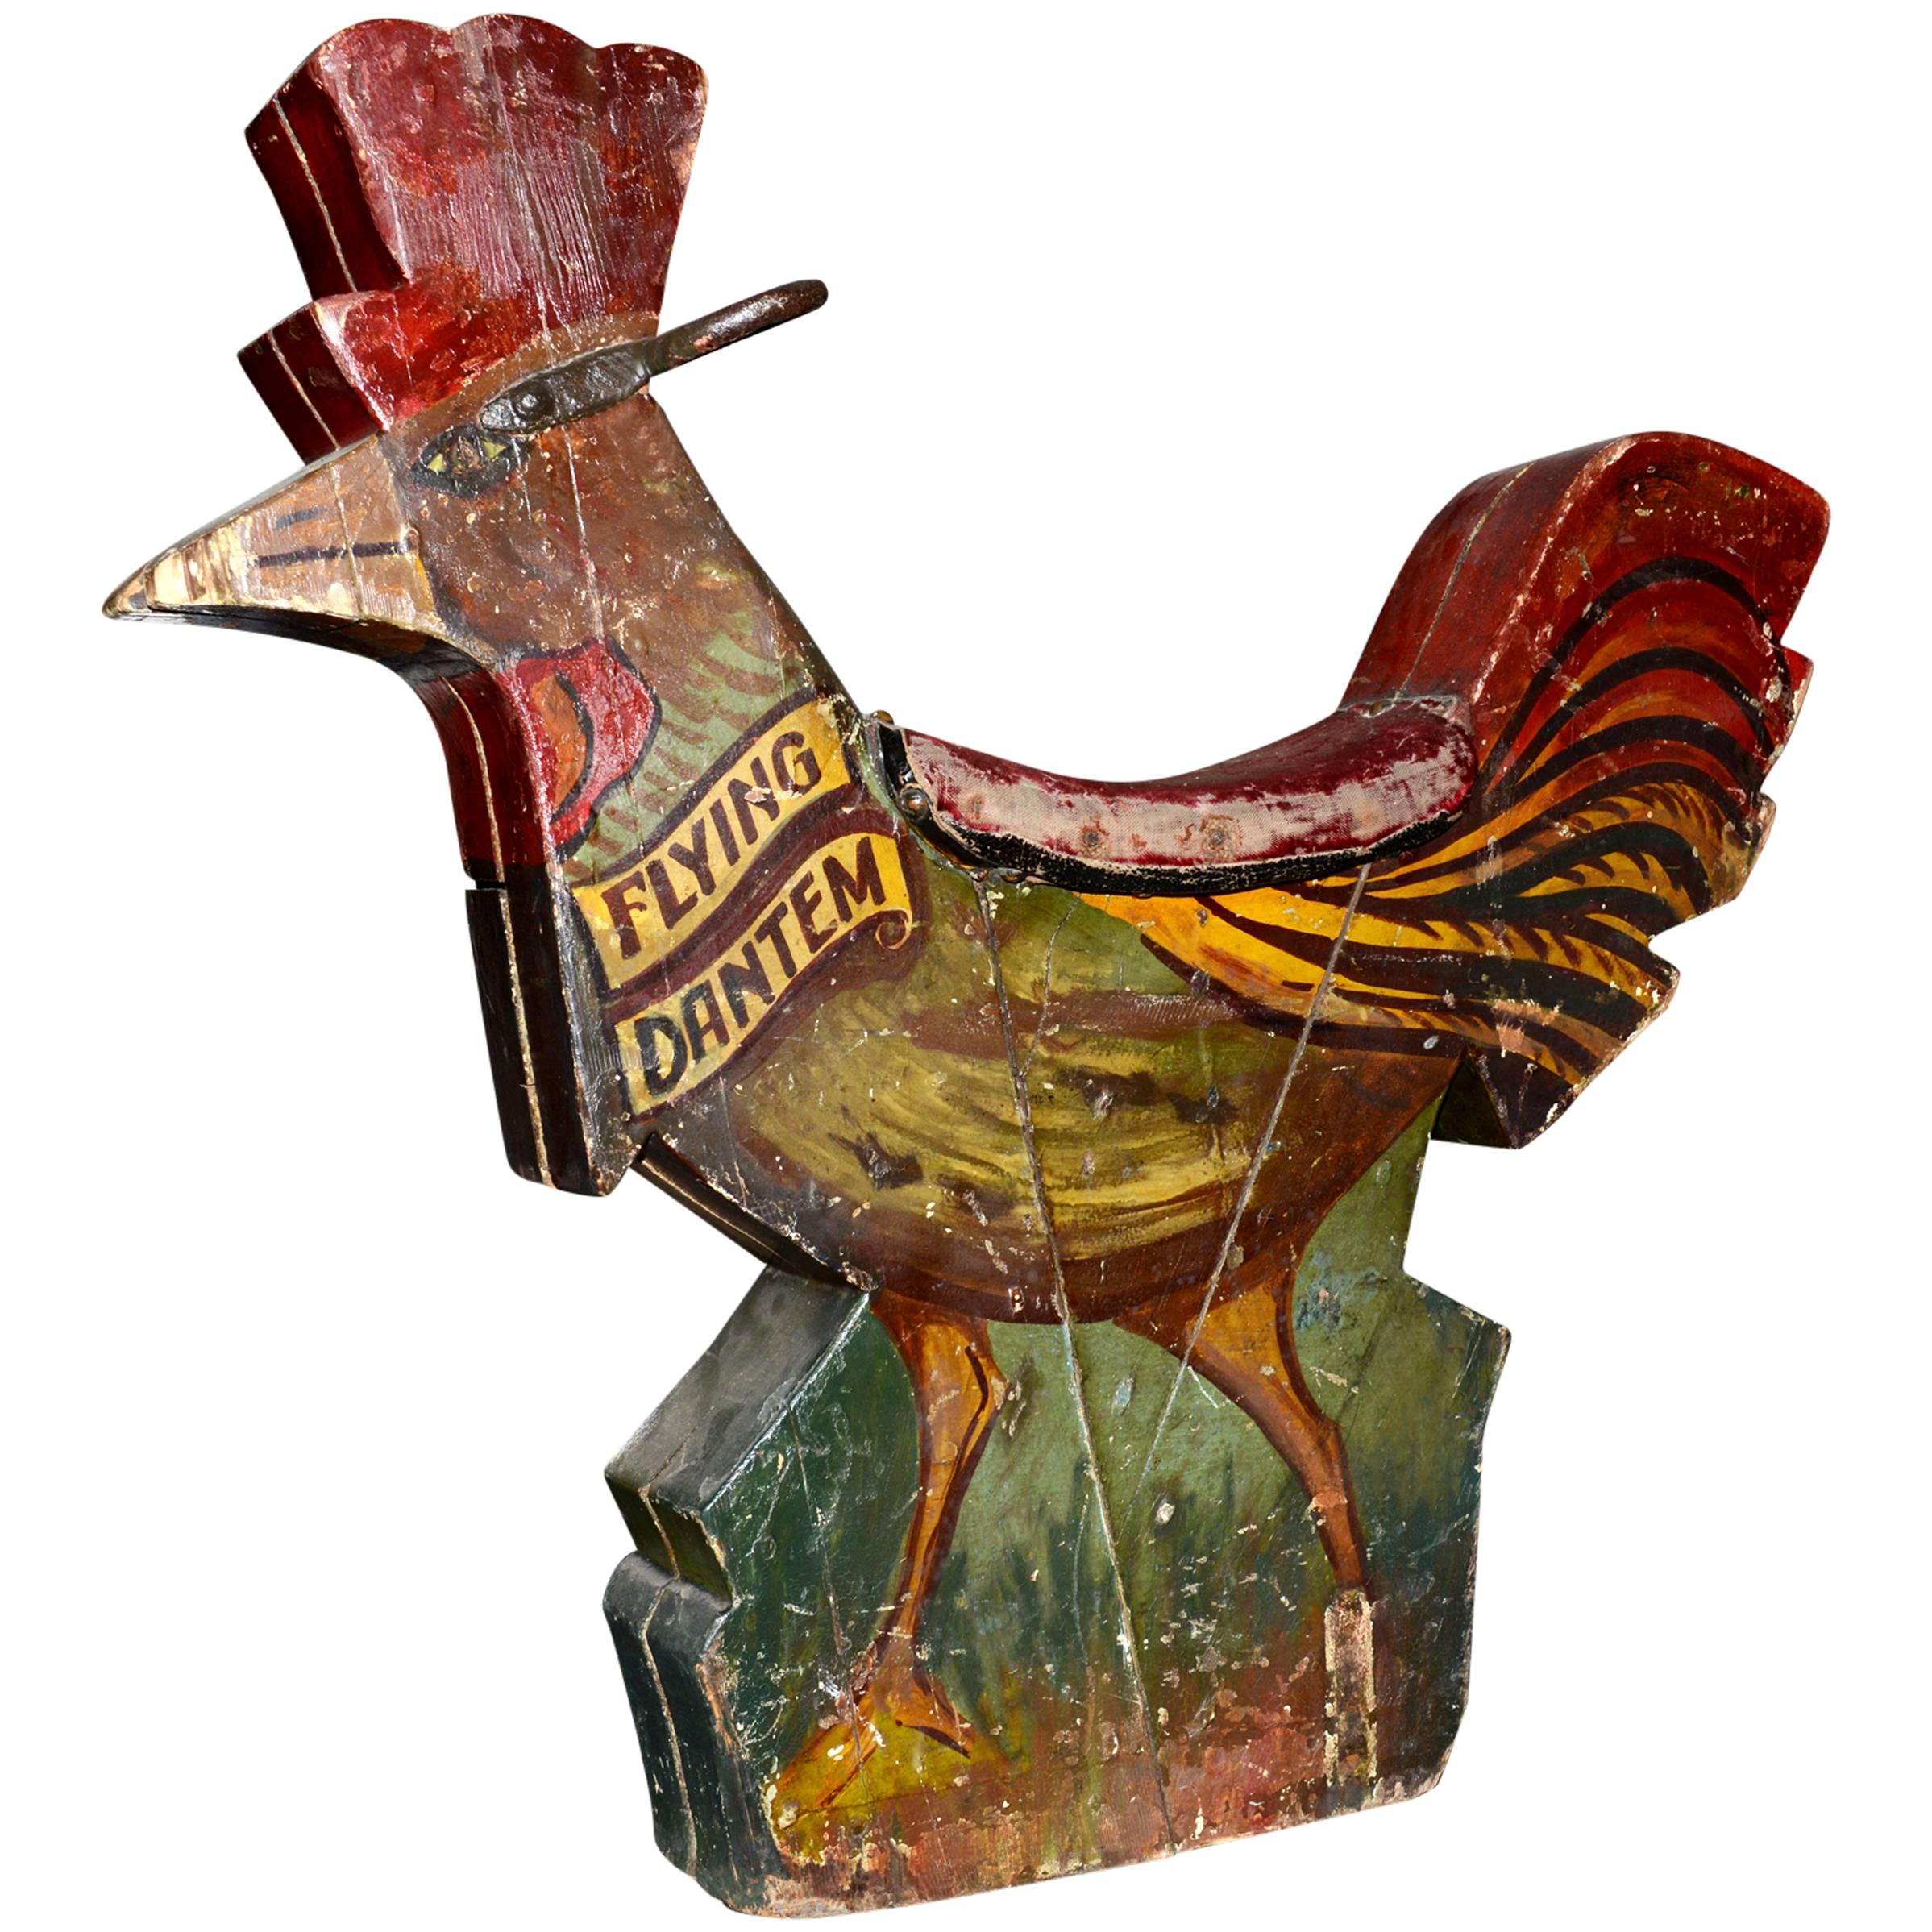 Cock in Wood by R.J Lakin from Streatham Workshop in London, Carousel, 1930